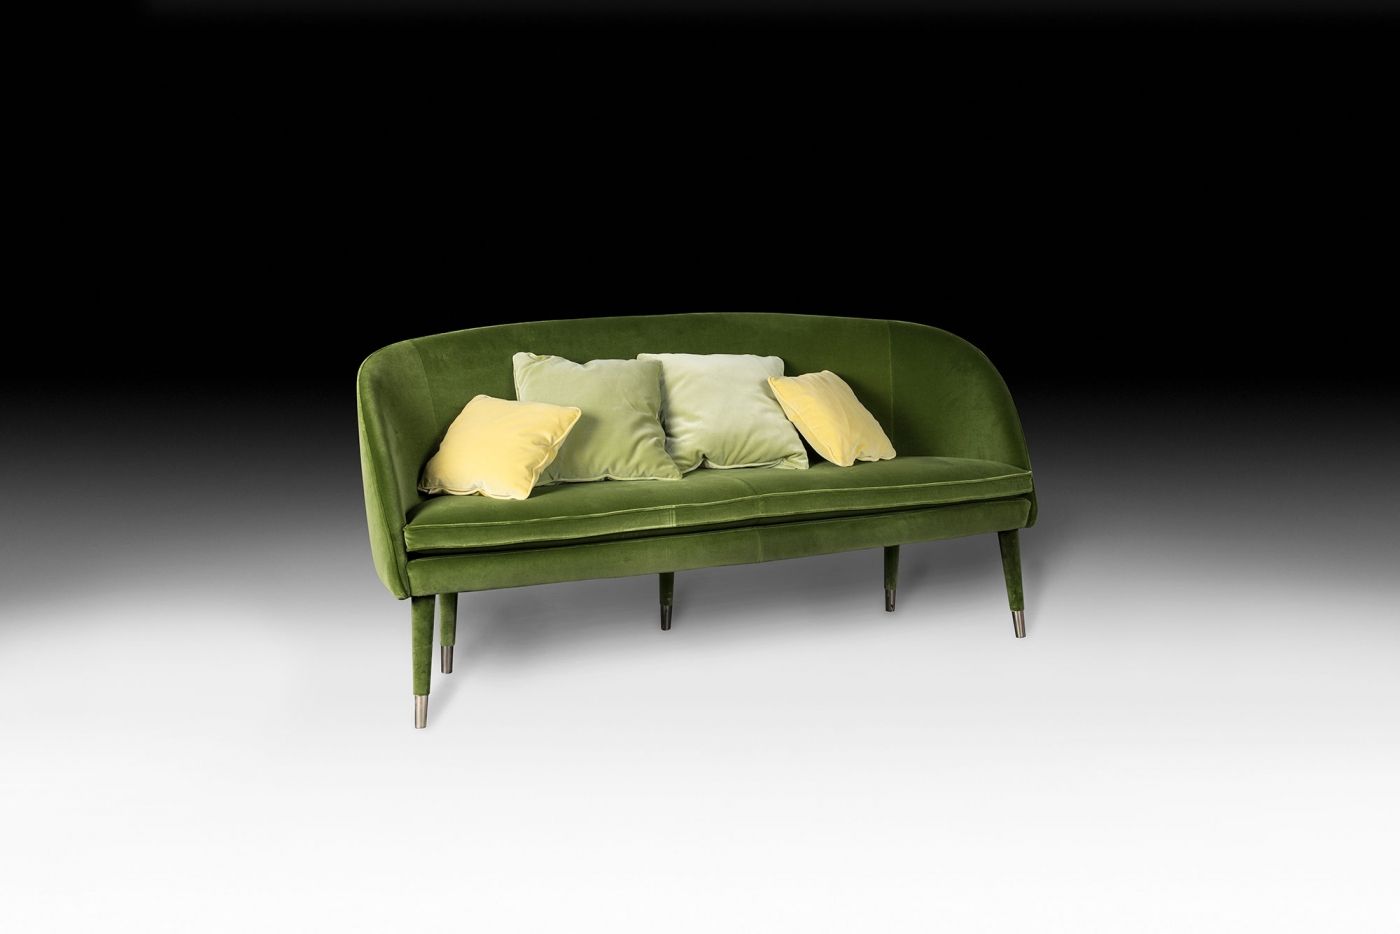 Modern & Classical Sofas, Armchairs, Outdoor Ottomans  100% Made In Italy Inside Sofas With Ottomans (View 15 of 15)